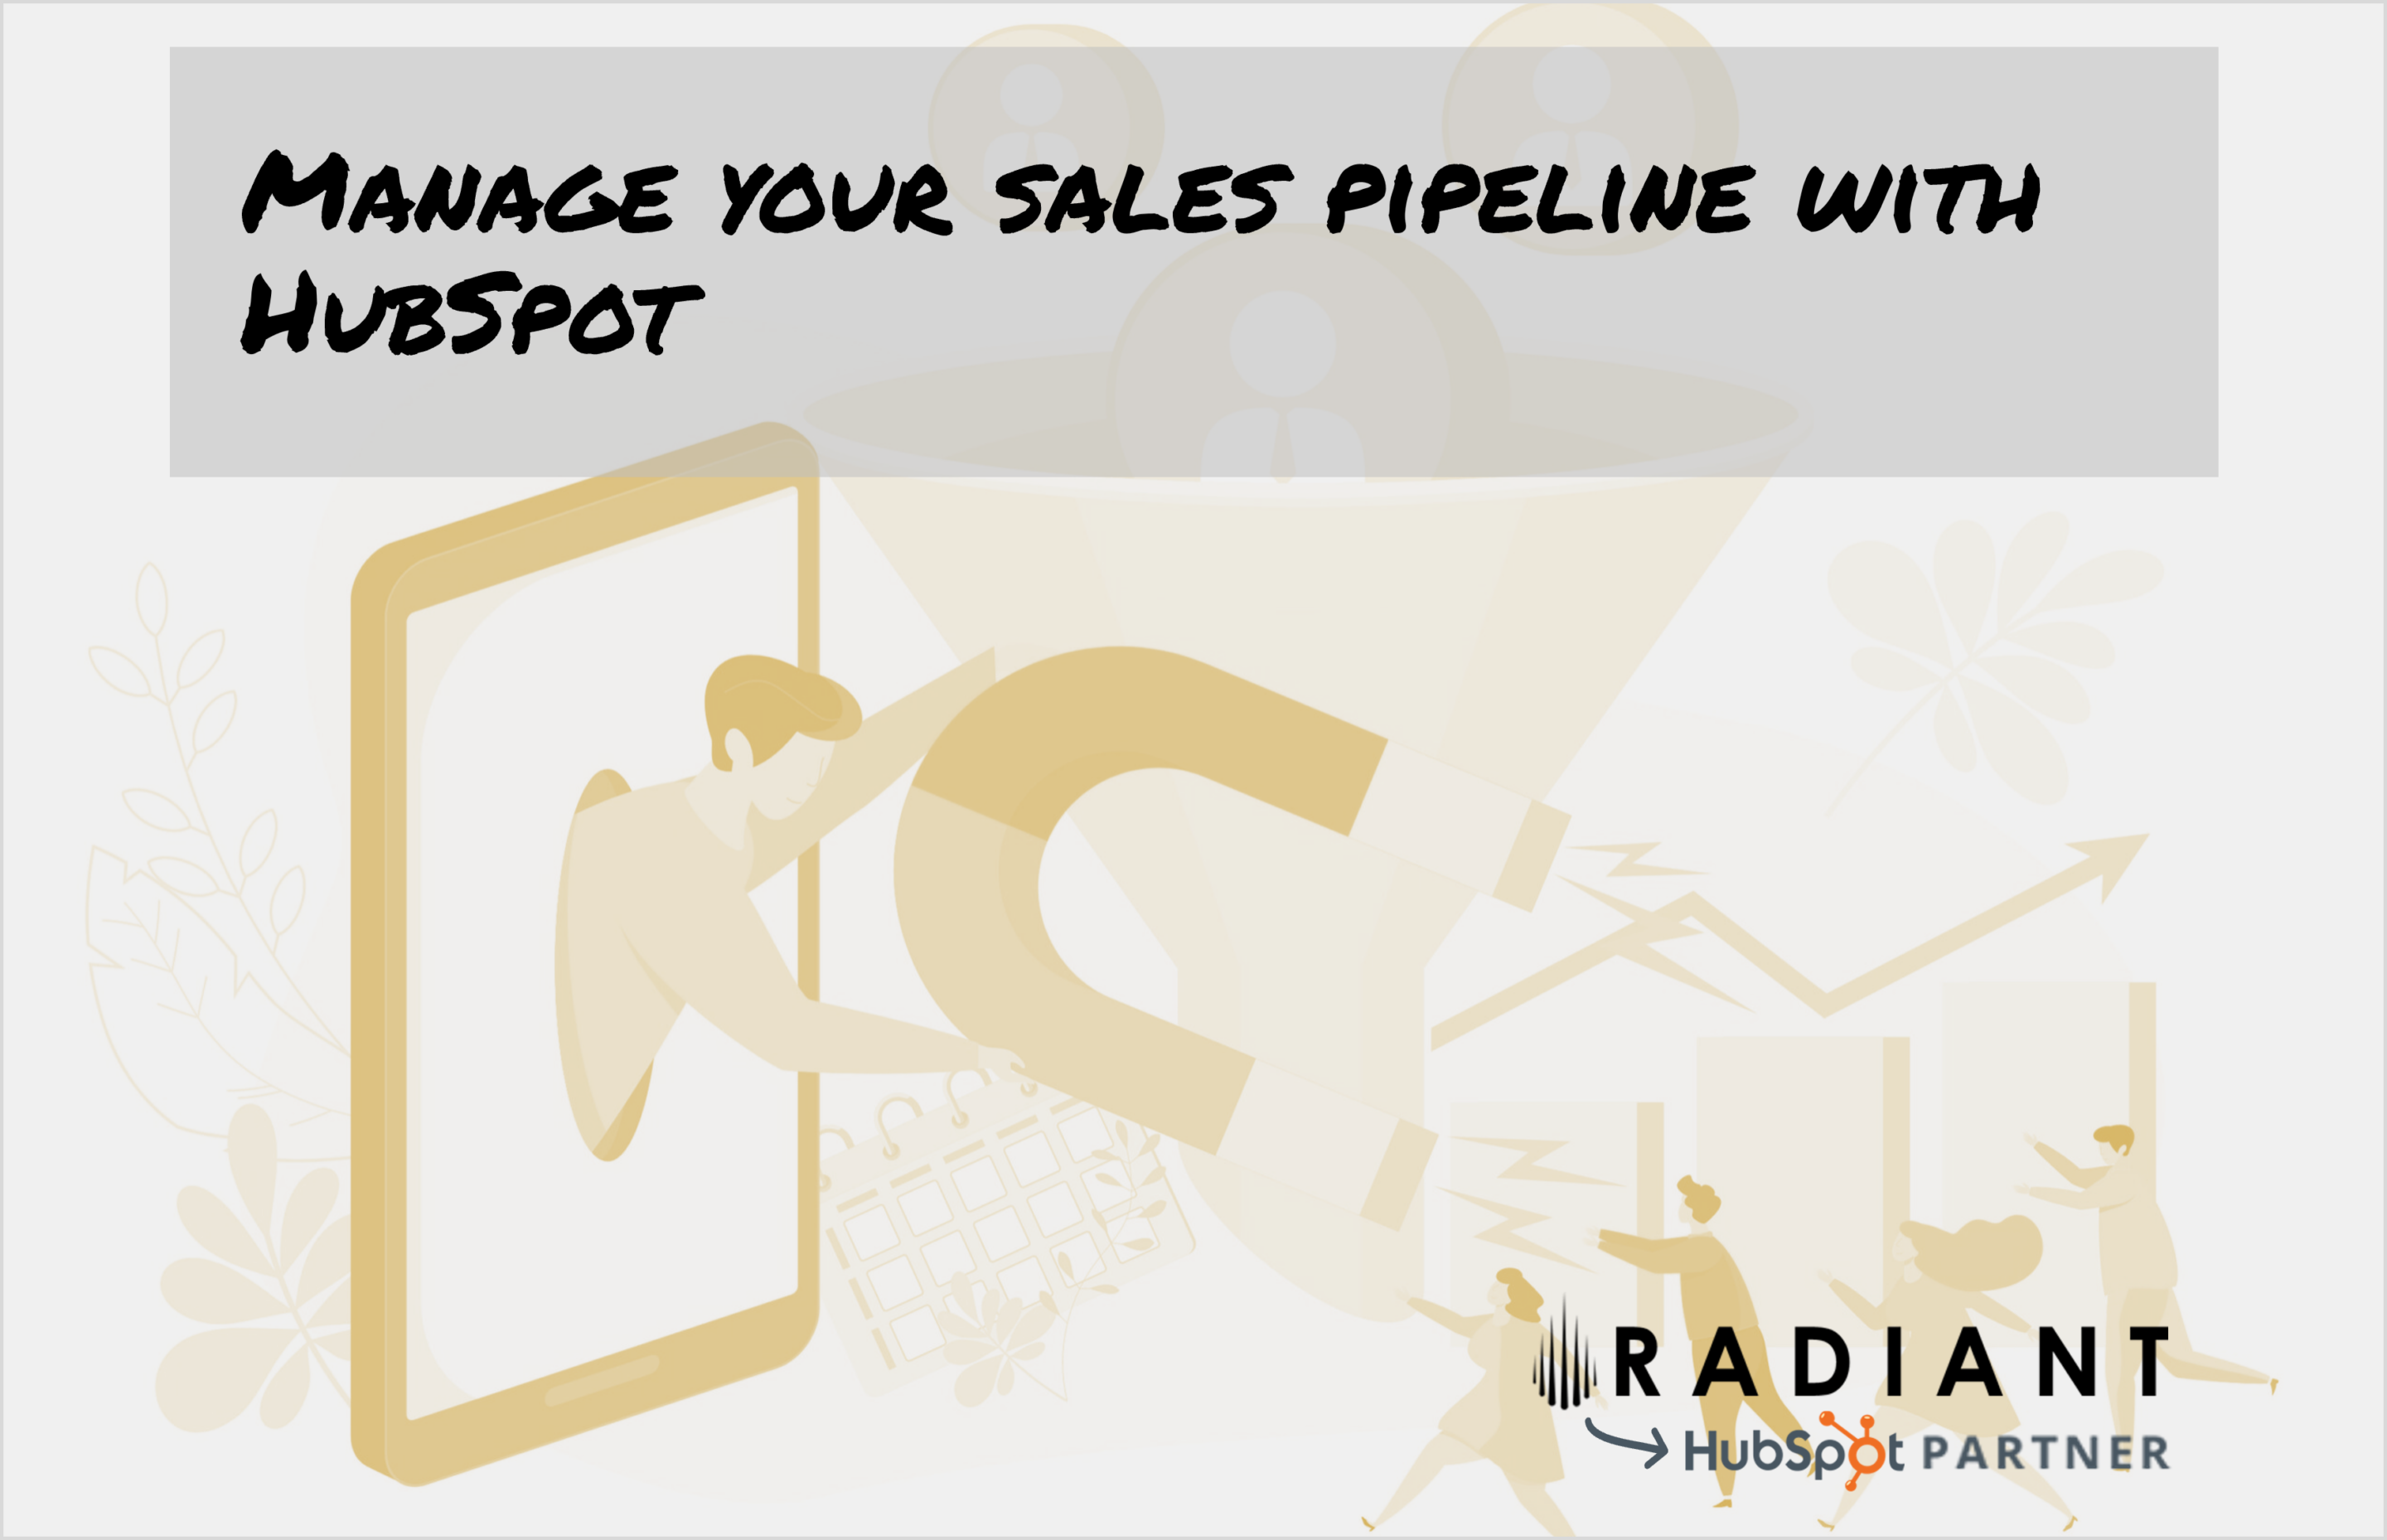 Manage your sales pipeline with HubSpot. Pipeline management for B2B provides an overview of your sales and ensures progress for each deal.